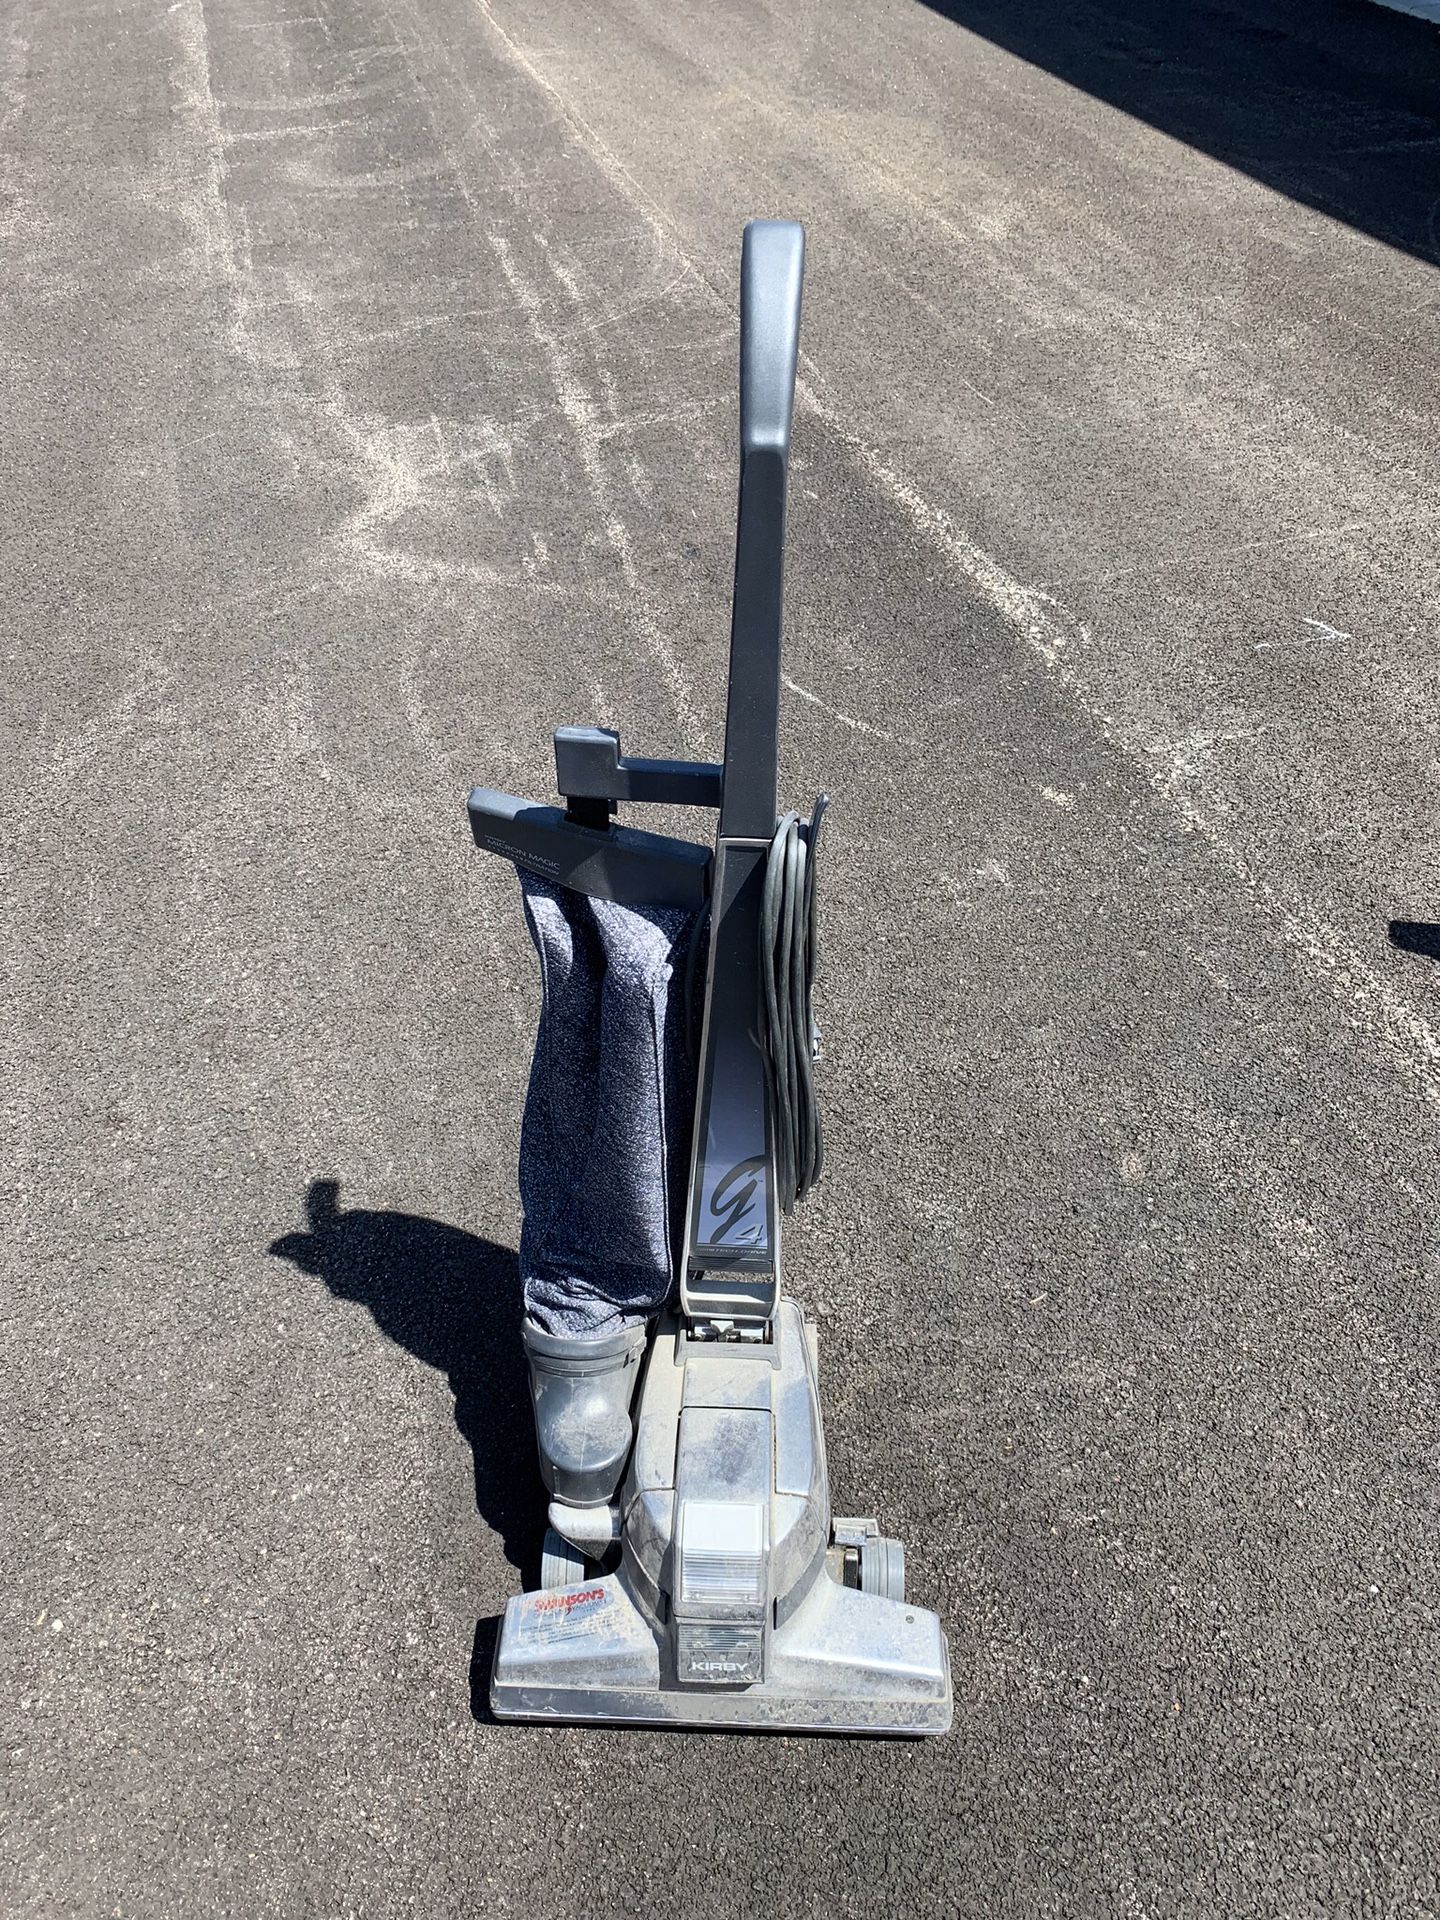 USED Kirby G4 Bagged Upright Vacuum Cleaner Self Propelled USA Made $95.